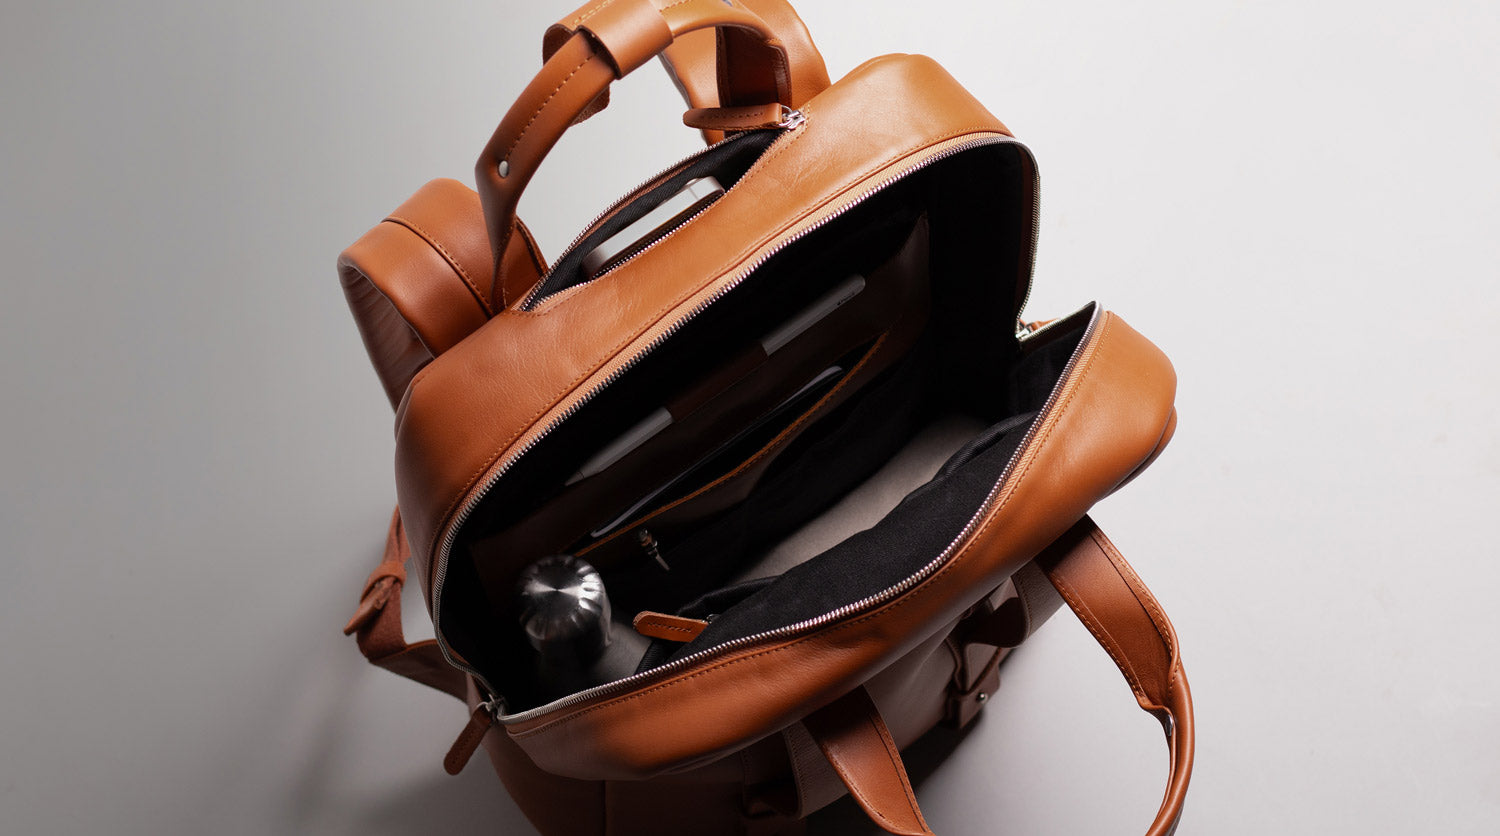 Open City leather backpack with inner padded pockets for laptops and tablets.